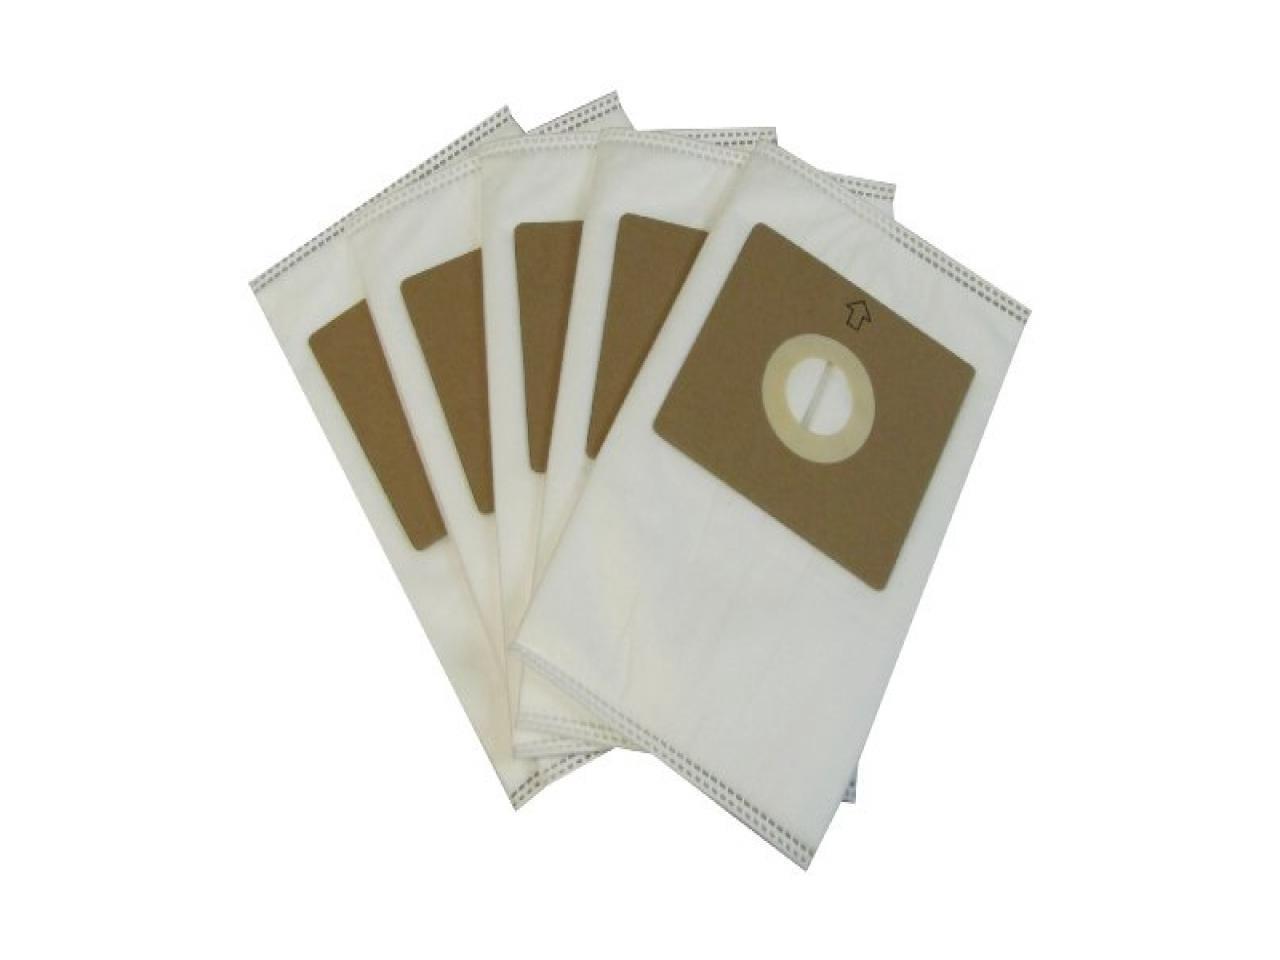 Replacement Vac Filter Bag for AHSC-1 Lil' Red AHLR-2 HEPA Filter Bags 